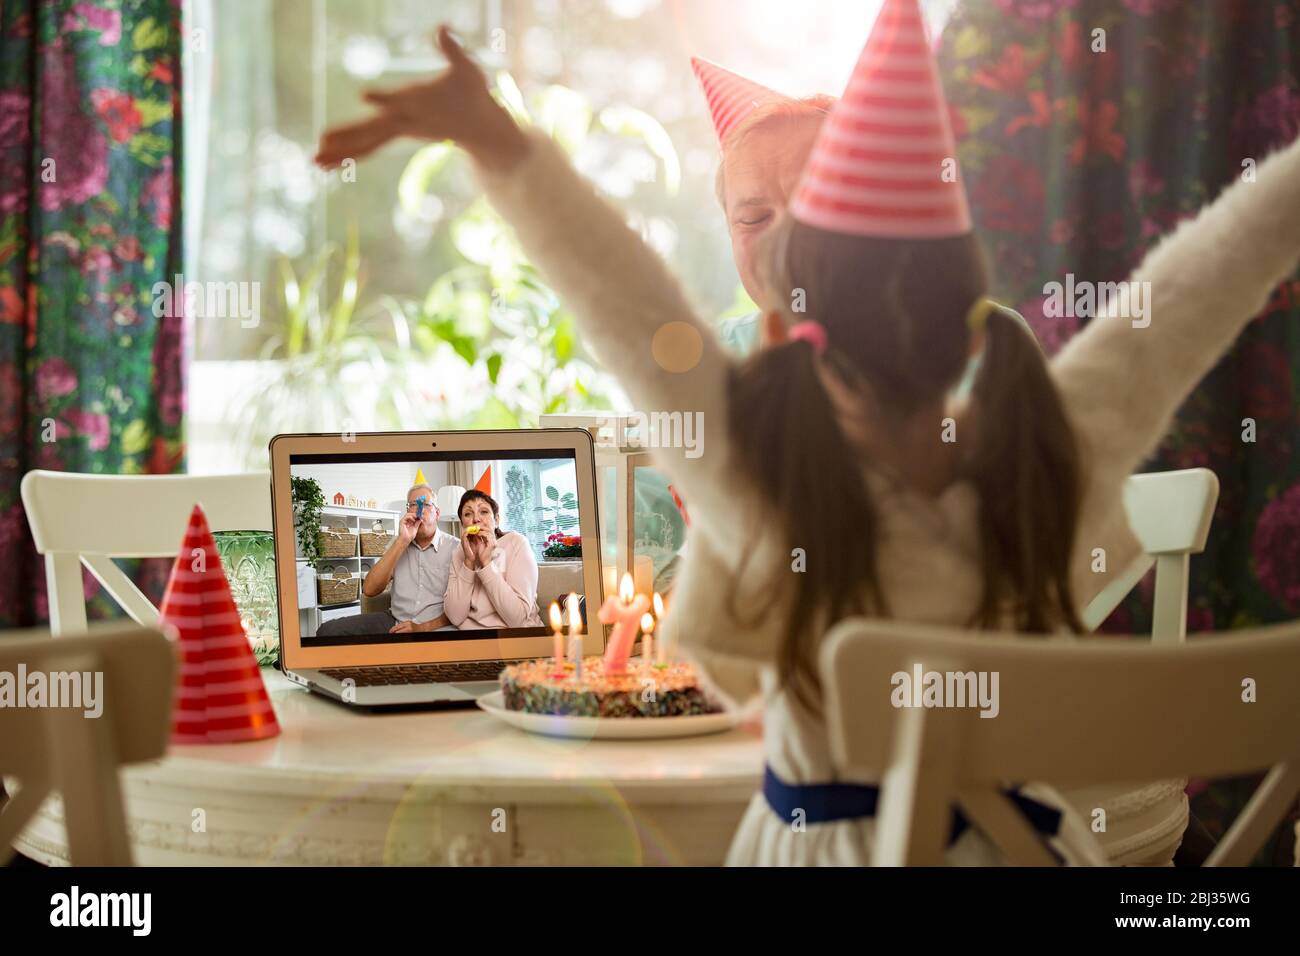 Happy little girl celebrating birthday at home with parents and grand parents on video call. Laptop with senior couple online, cake with candles Stock Photo